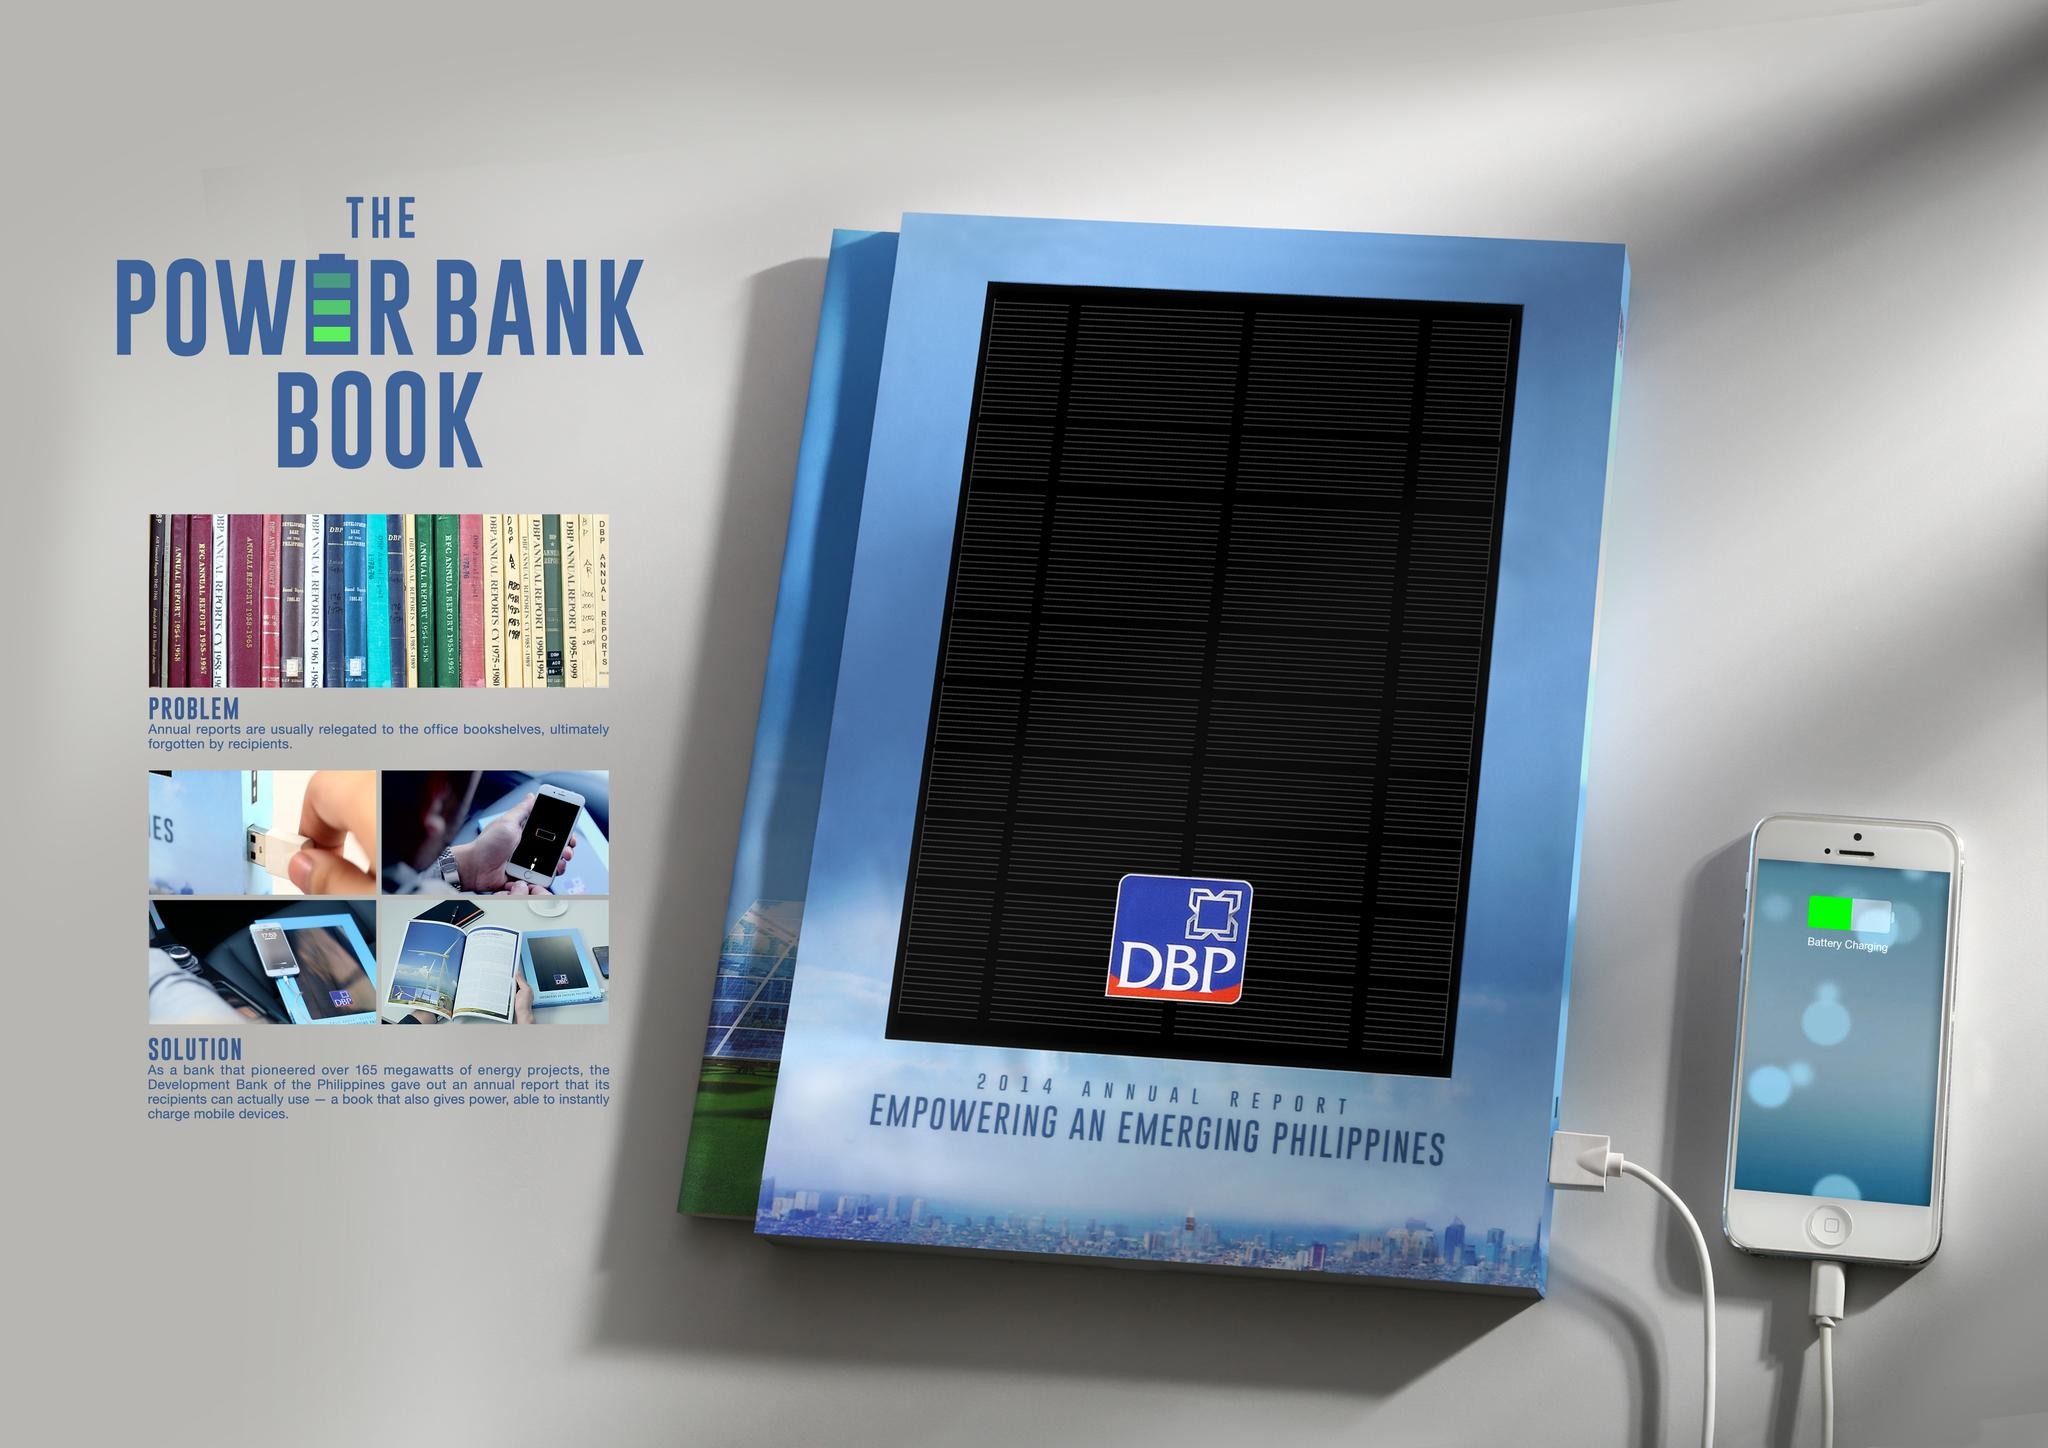 THE POWER BANK BOOK